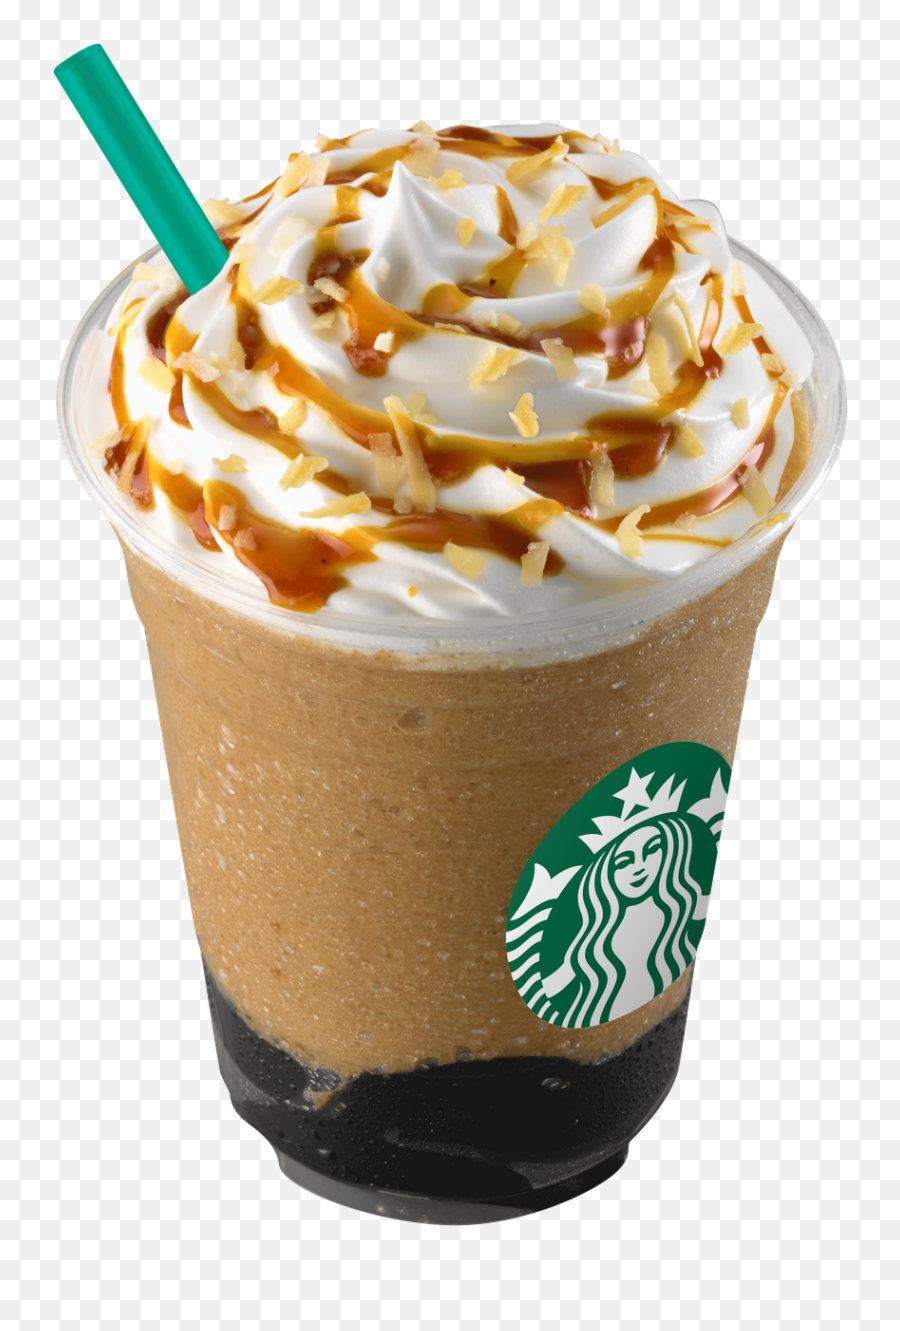 Starbucks Frappuccino Png Picture - National Day Sg Starbucks Special,Frappuccino Png